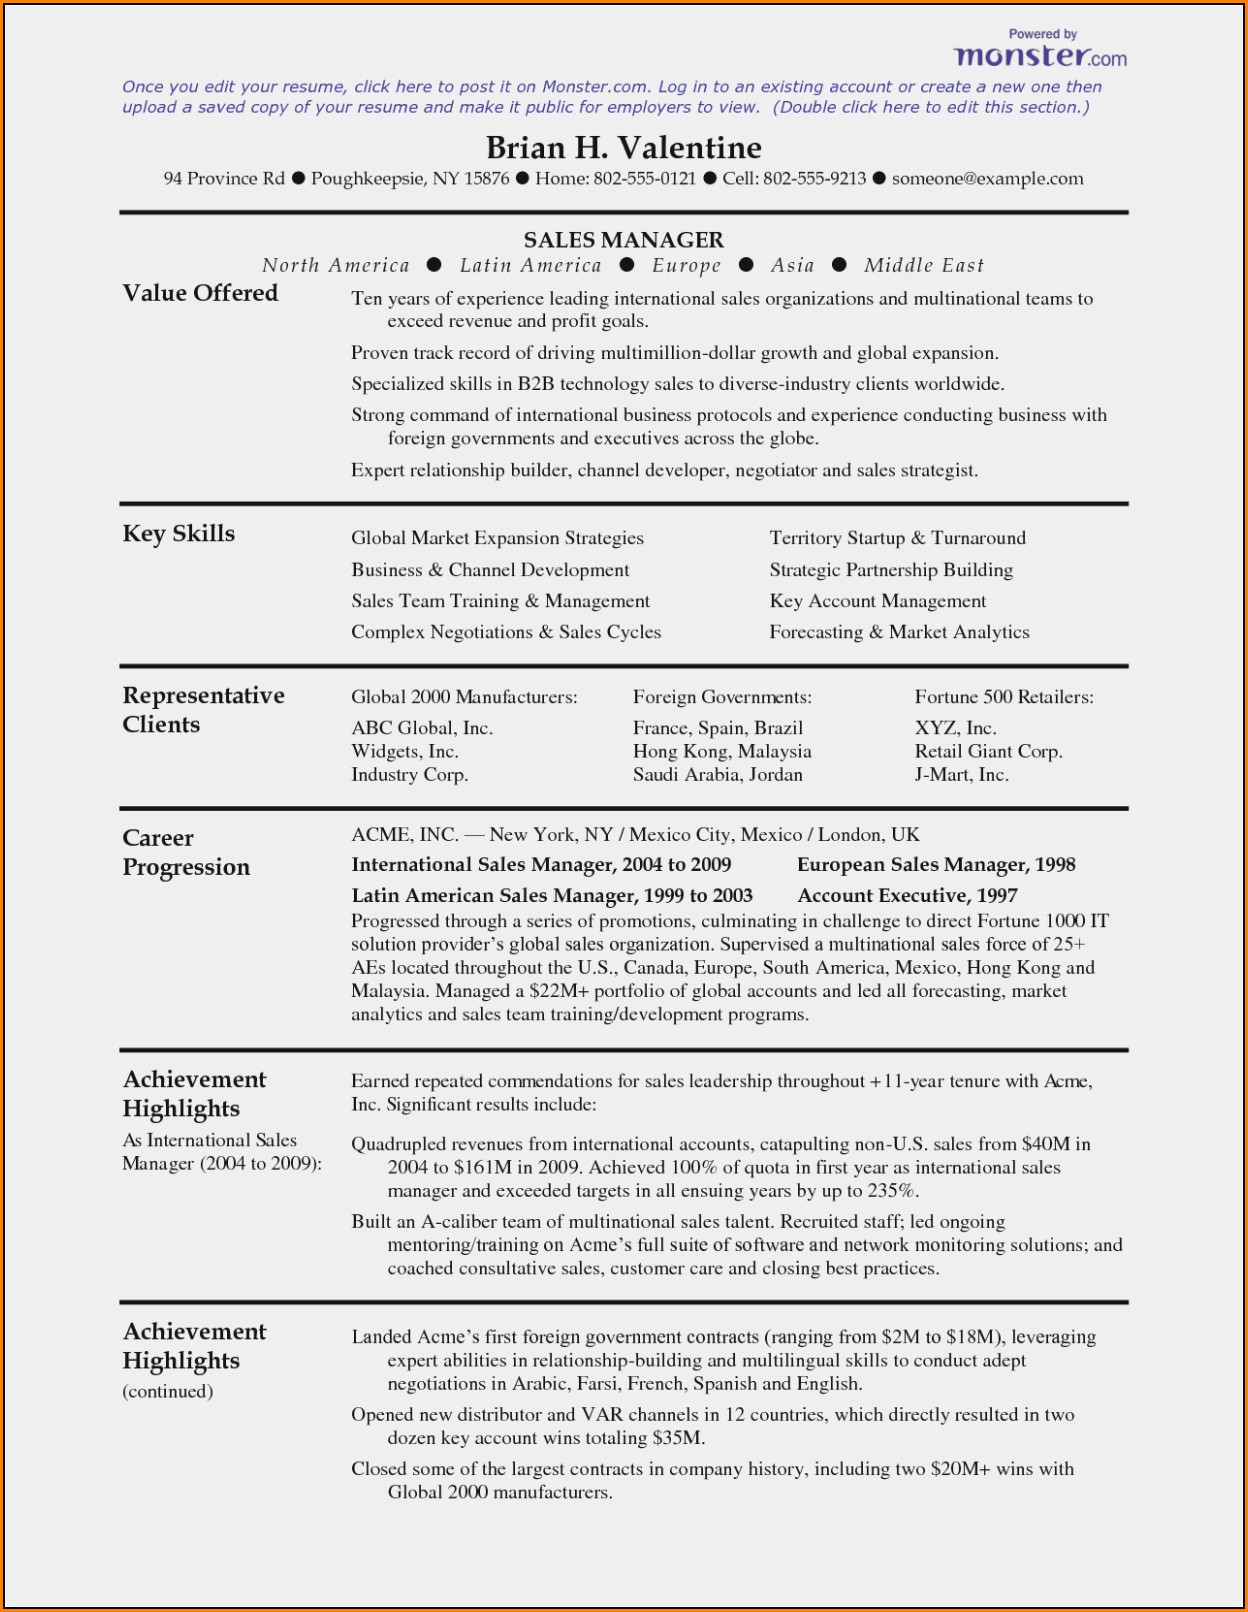 Monster Resume Services